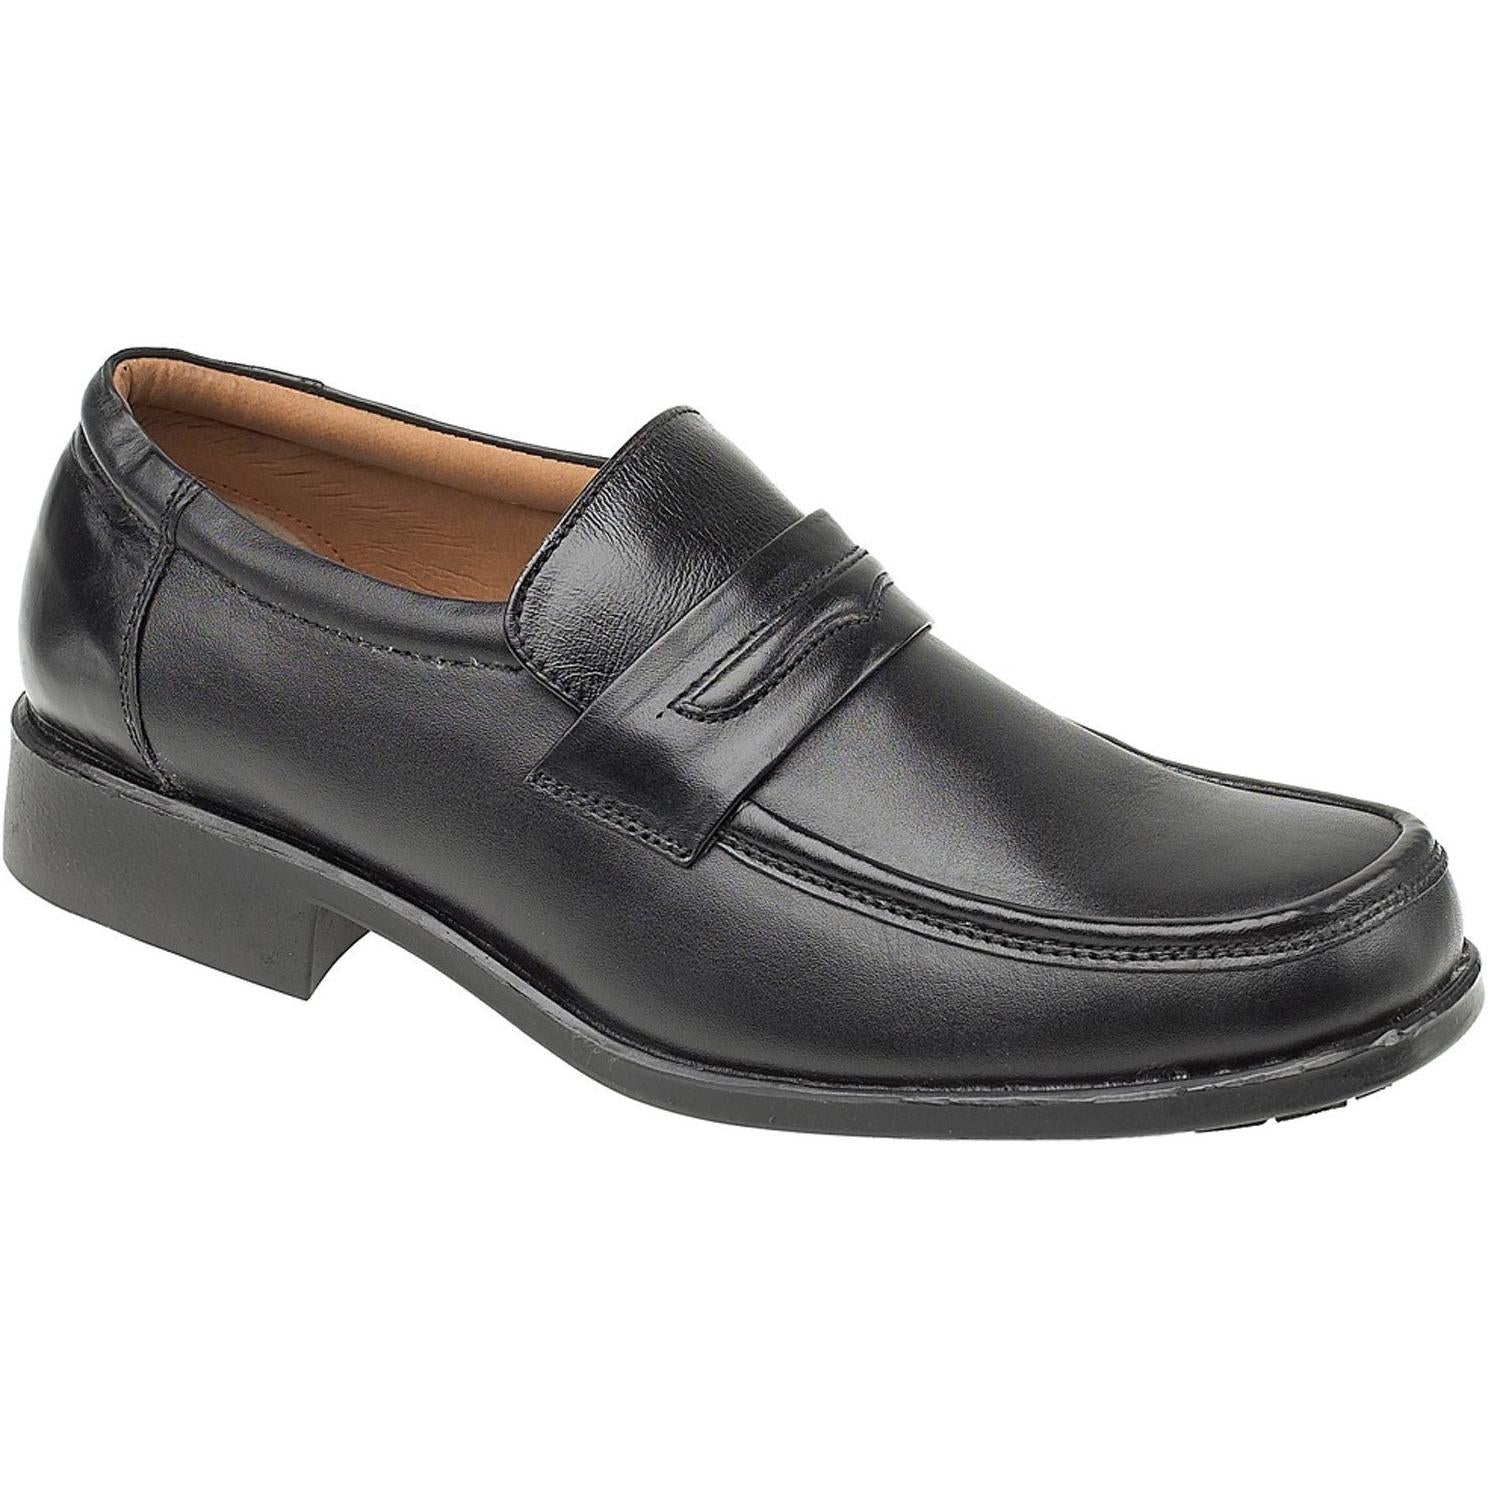 Amblers Manchester Leather Loafer Shoes